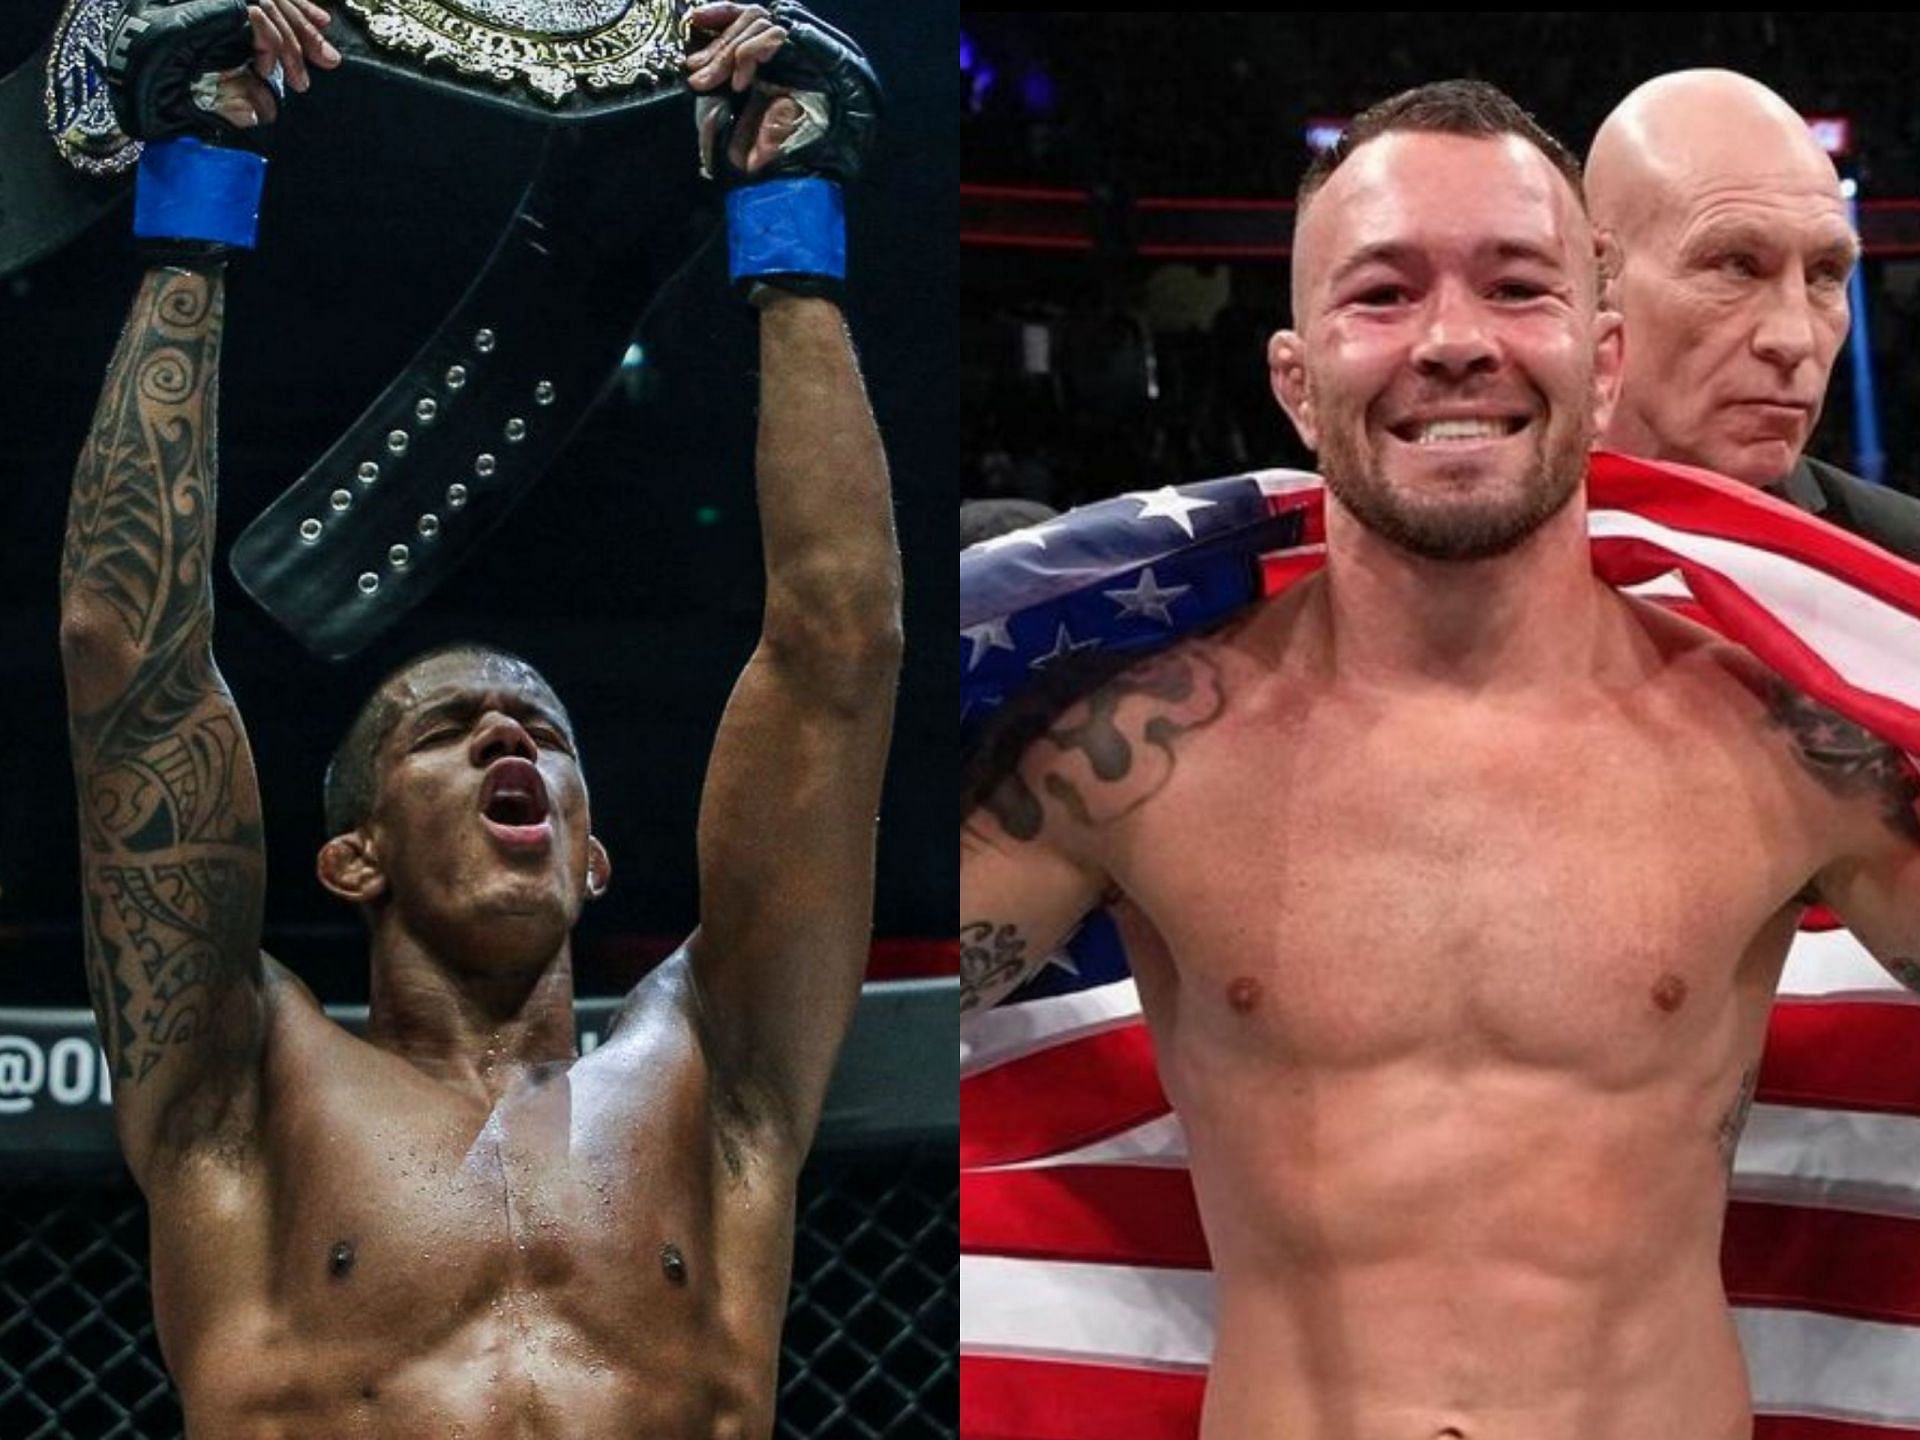 Adriano Moraes (left) and Colby Covington (right). [Photo: ONE Championship / Instagram: @colbycovmma]